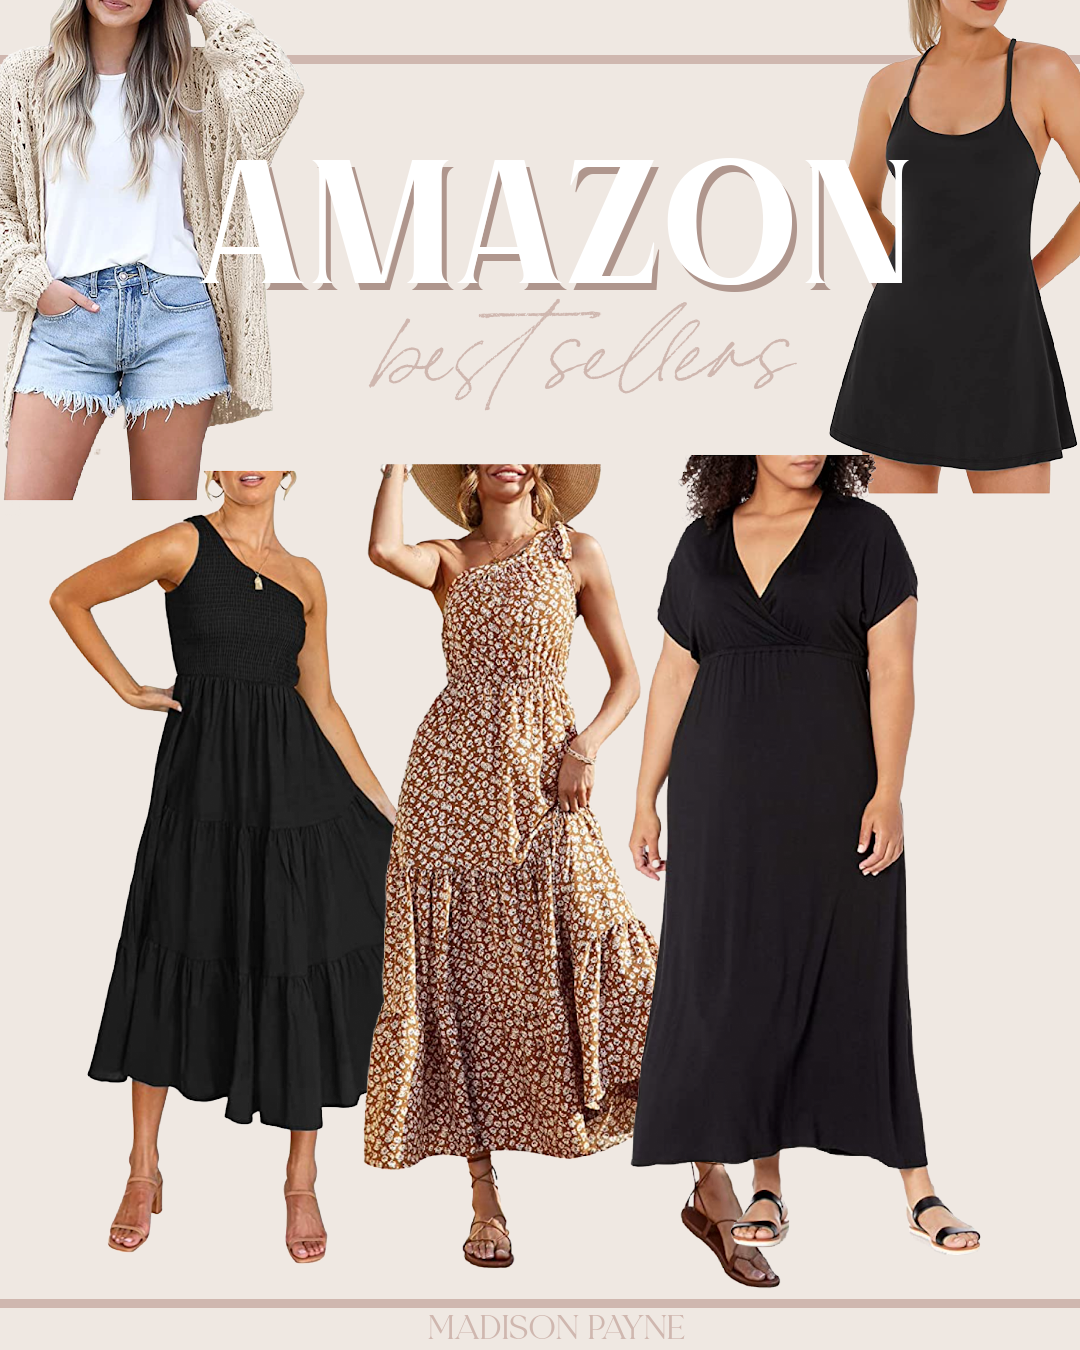 YOUR MOST LOVED AMAZON FASHION ITEMS | TOP BEST SELLERS | Madison Payne